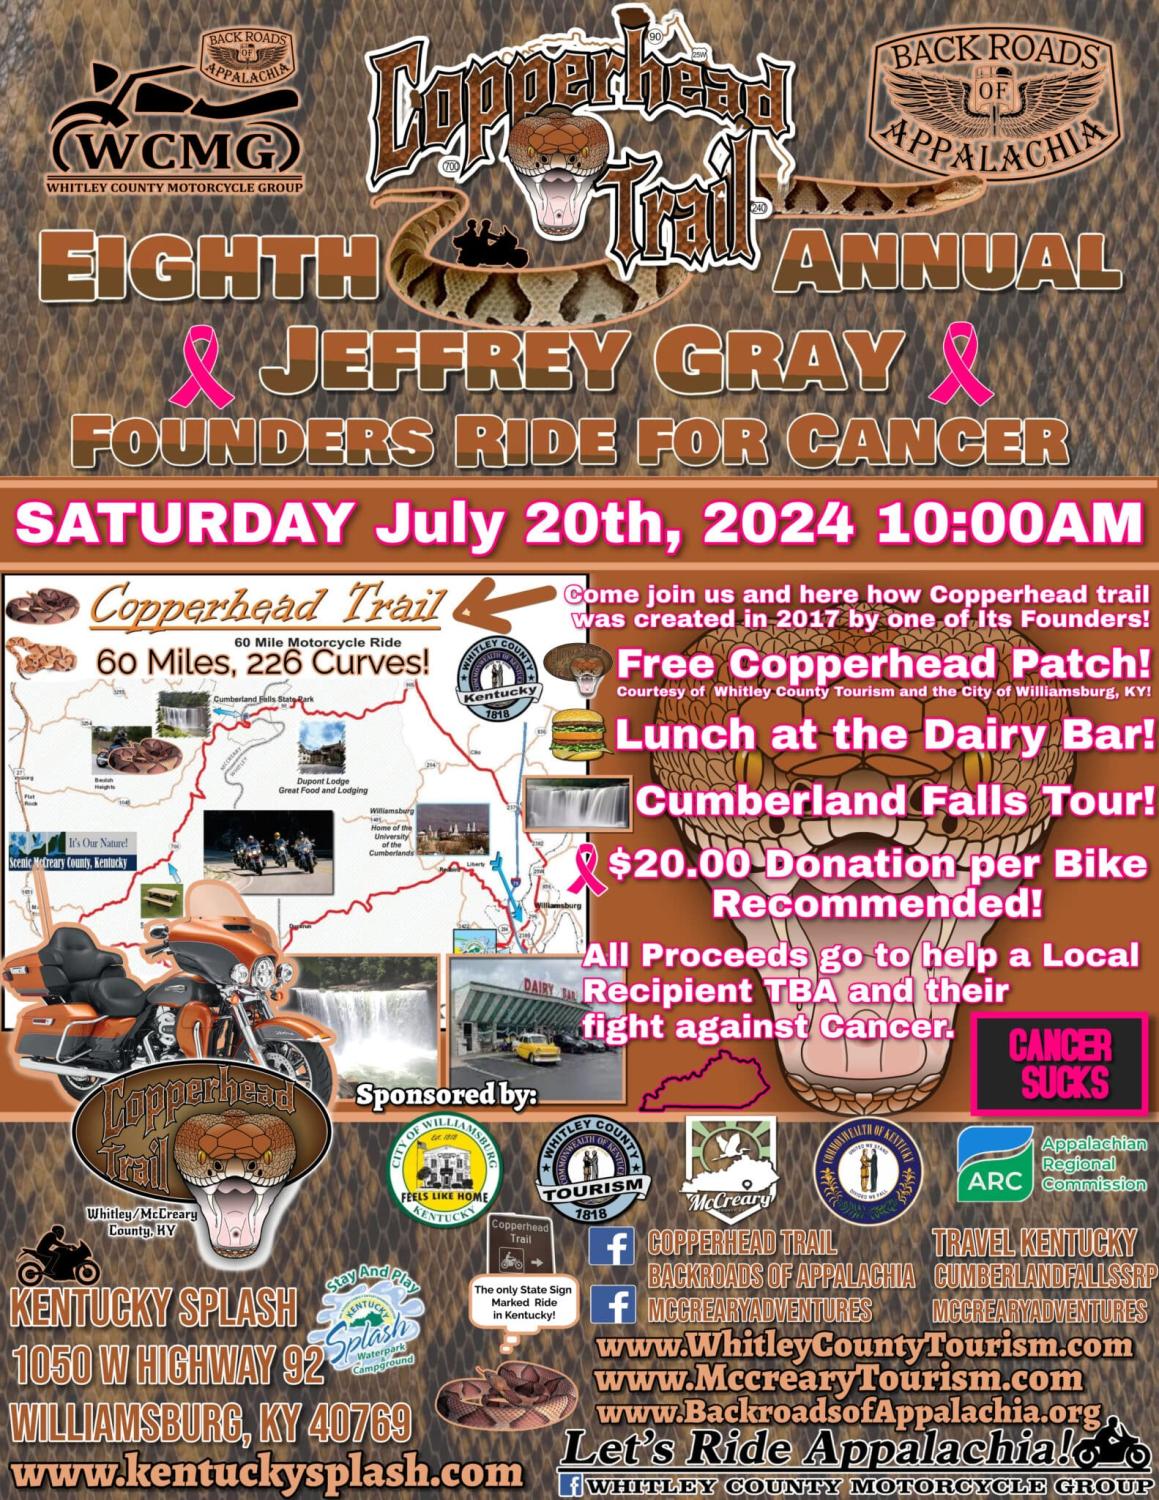 The WCMG and BOA Copperhead Trail Founders Ride for Cancer